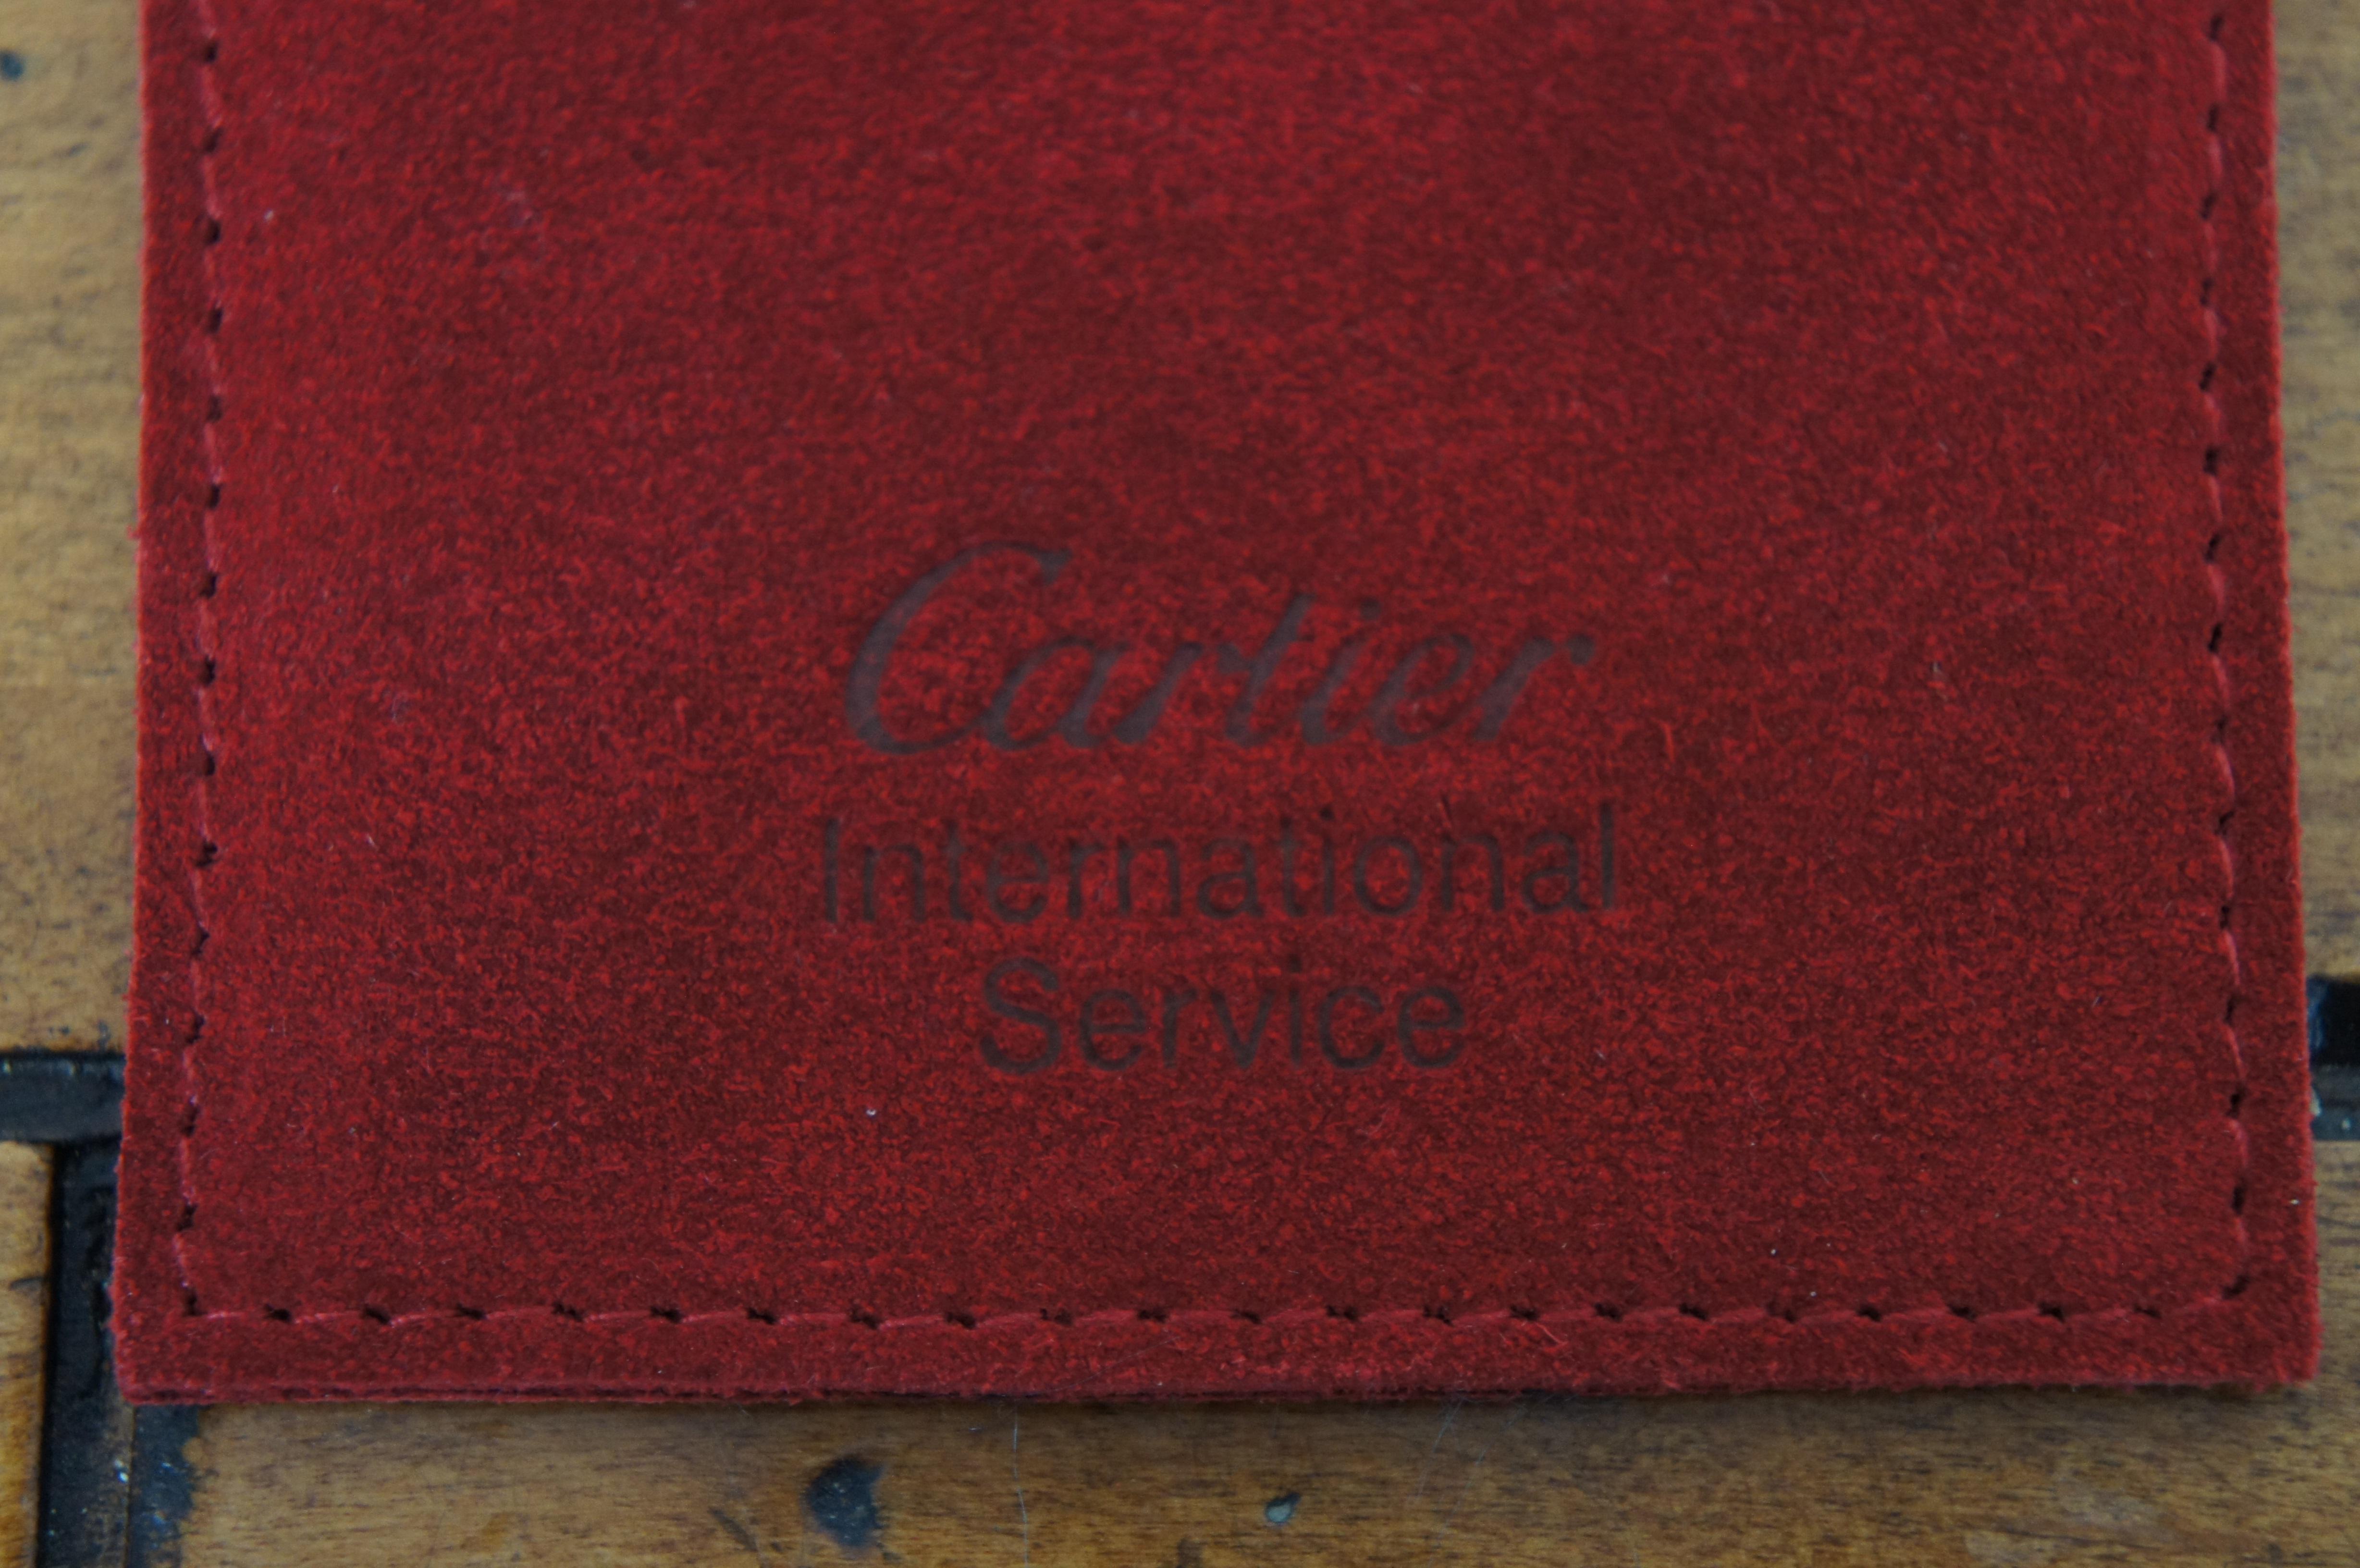 2 Cartier Glasses Sunglasses Case Pair Red Leather Sleeve Embossed Box 1